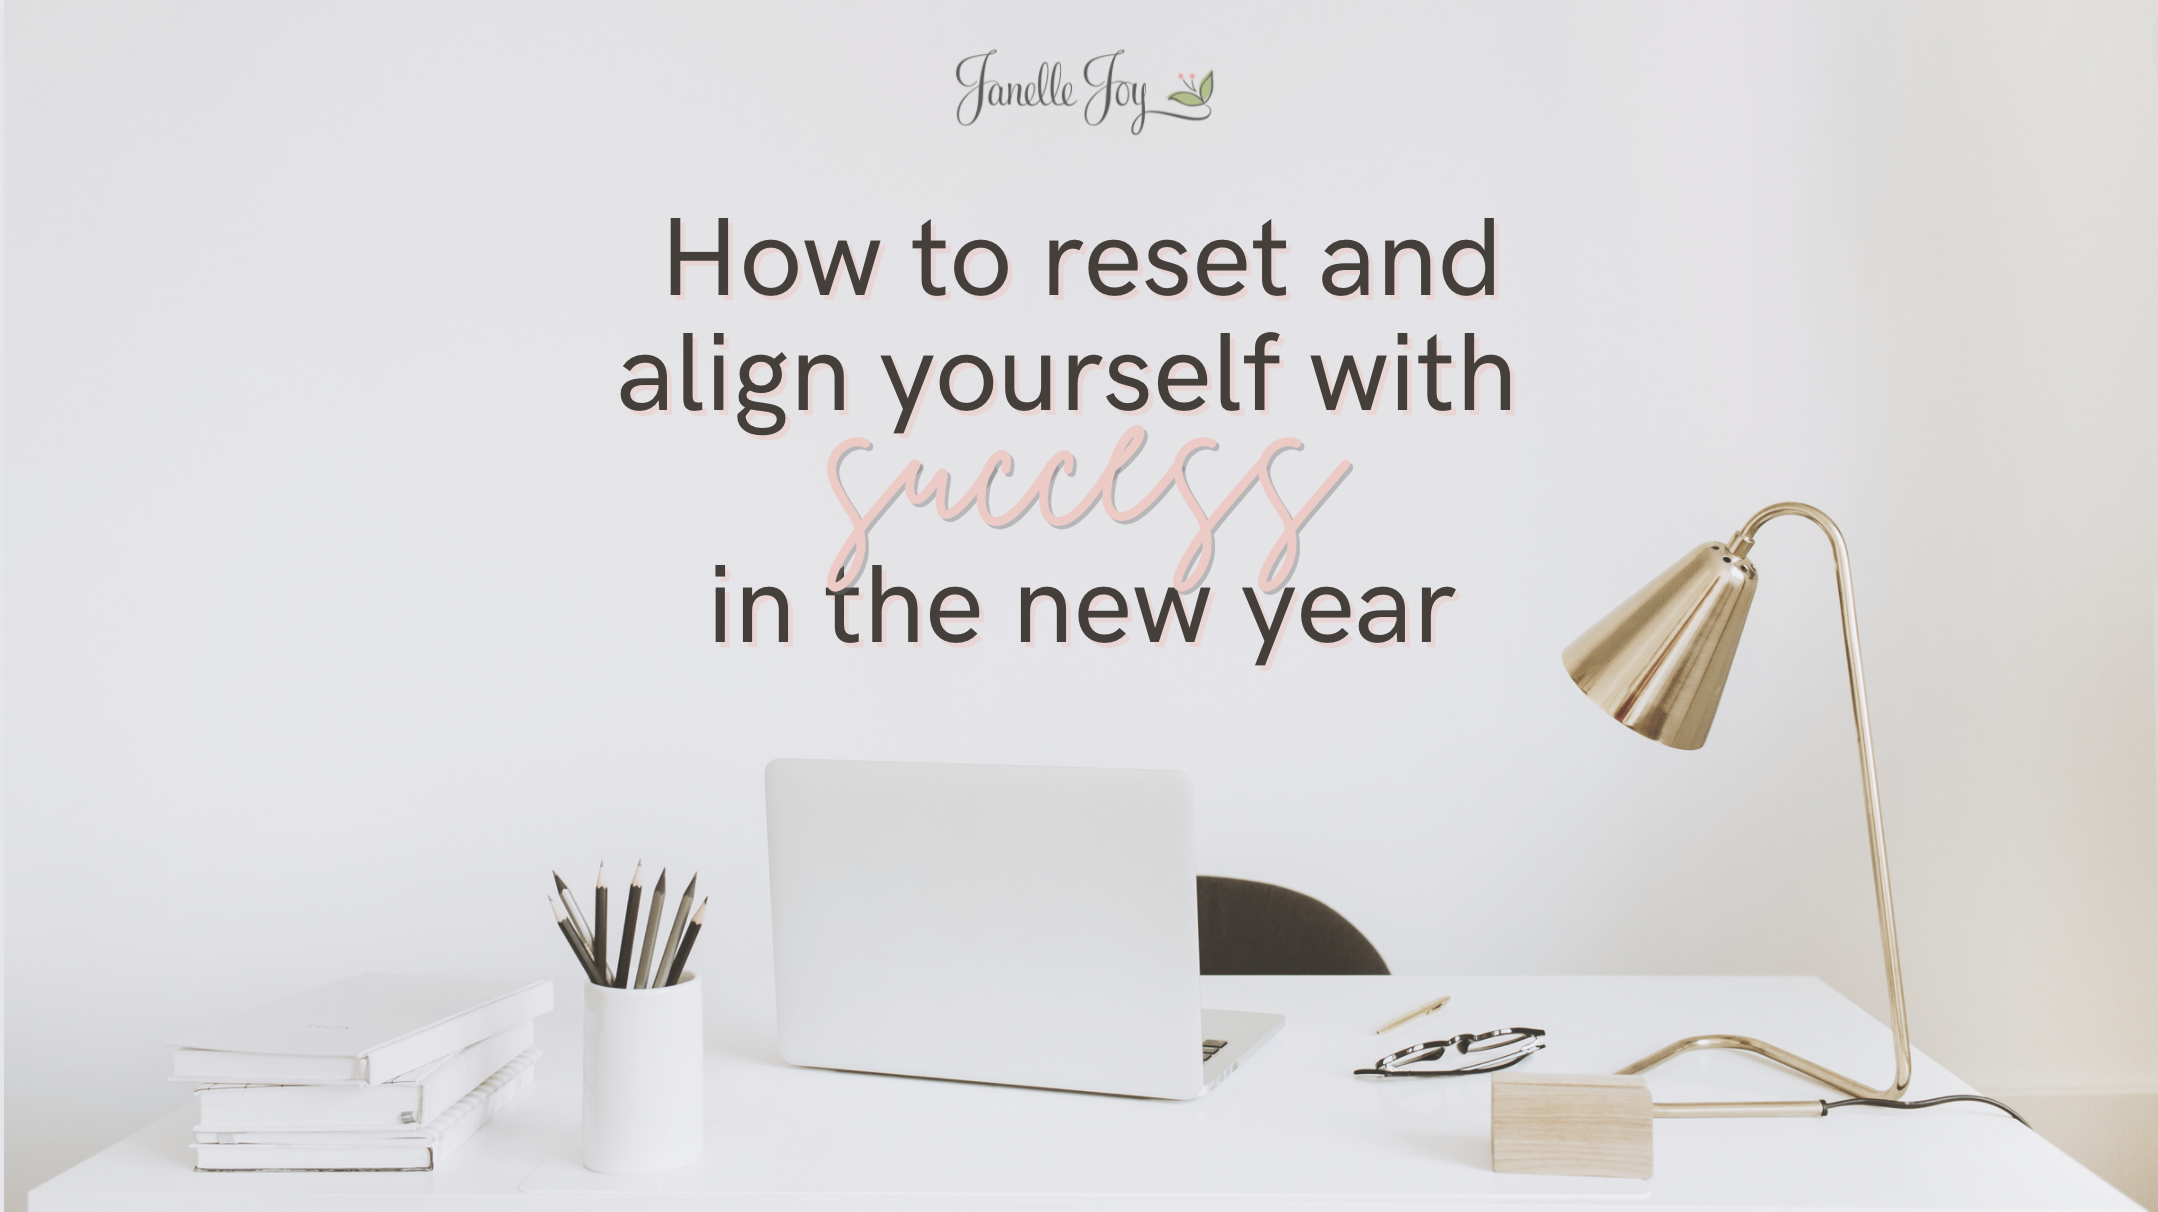 How to reset and align yourself with success in the new year